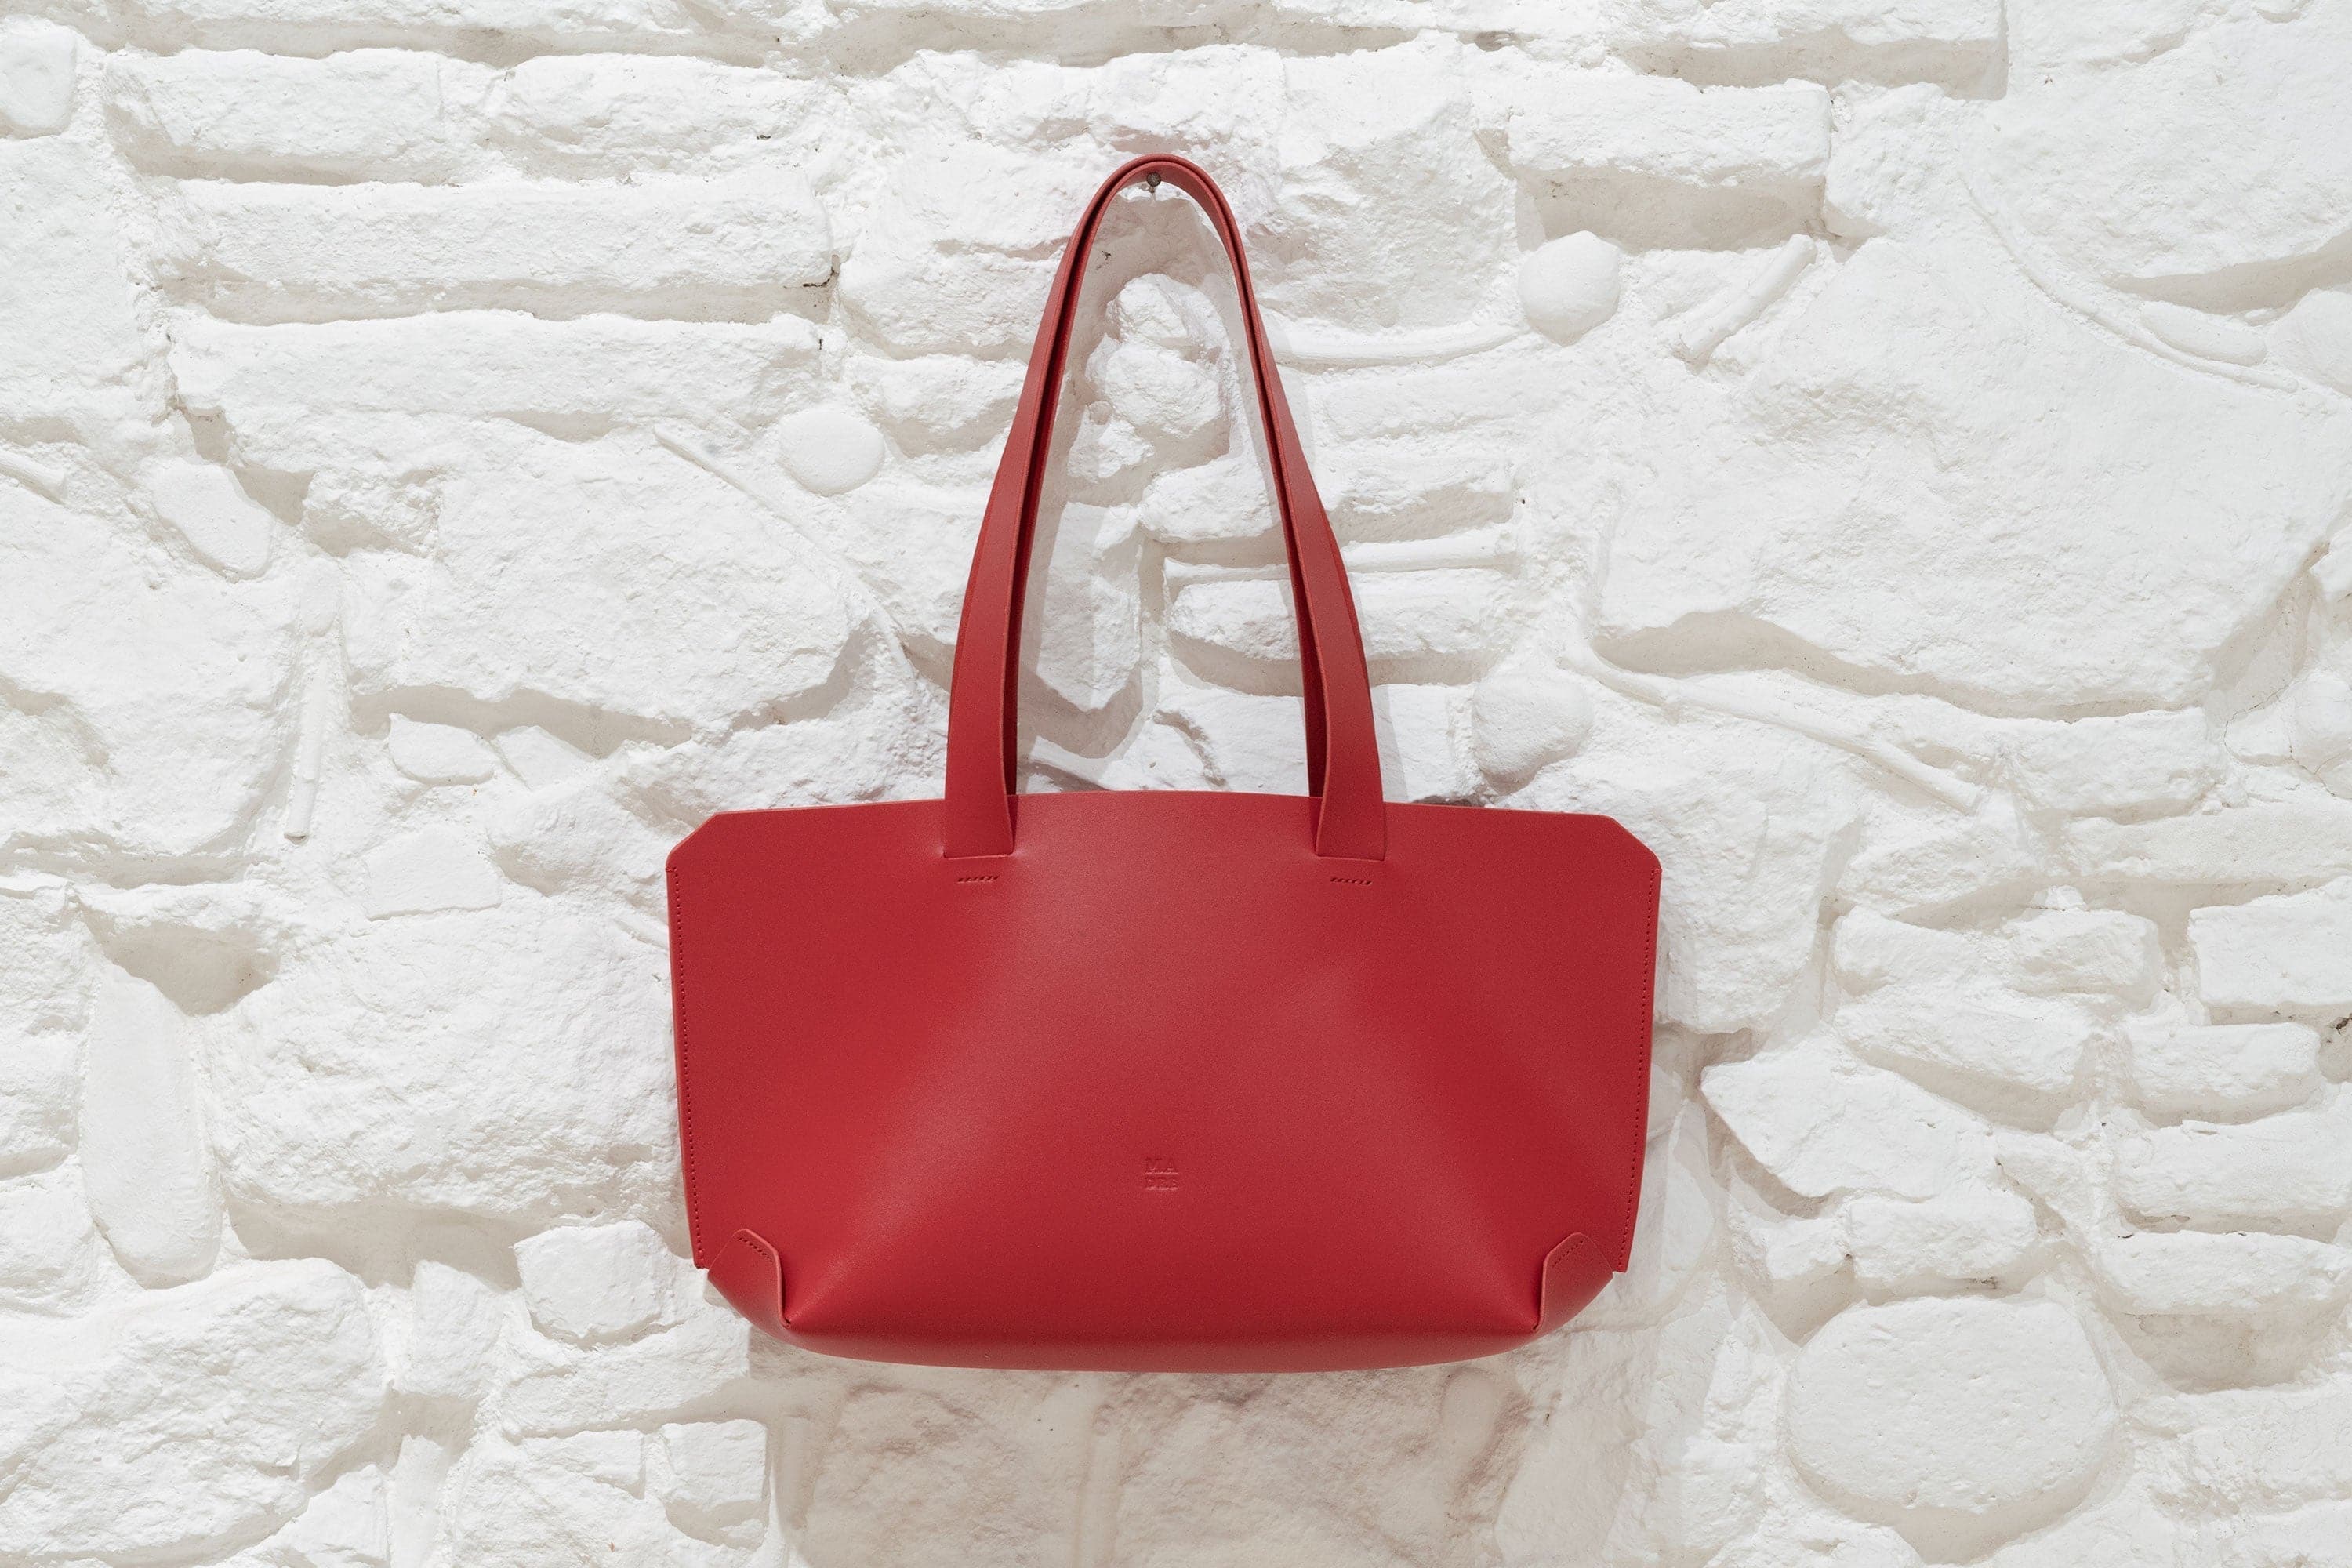 Tote Bag Red Color Vegetable Tanned Leather Hanging on Wall German Design By Manuel Dreesmann Atelier Madre Barcelona Spain